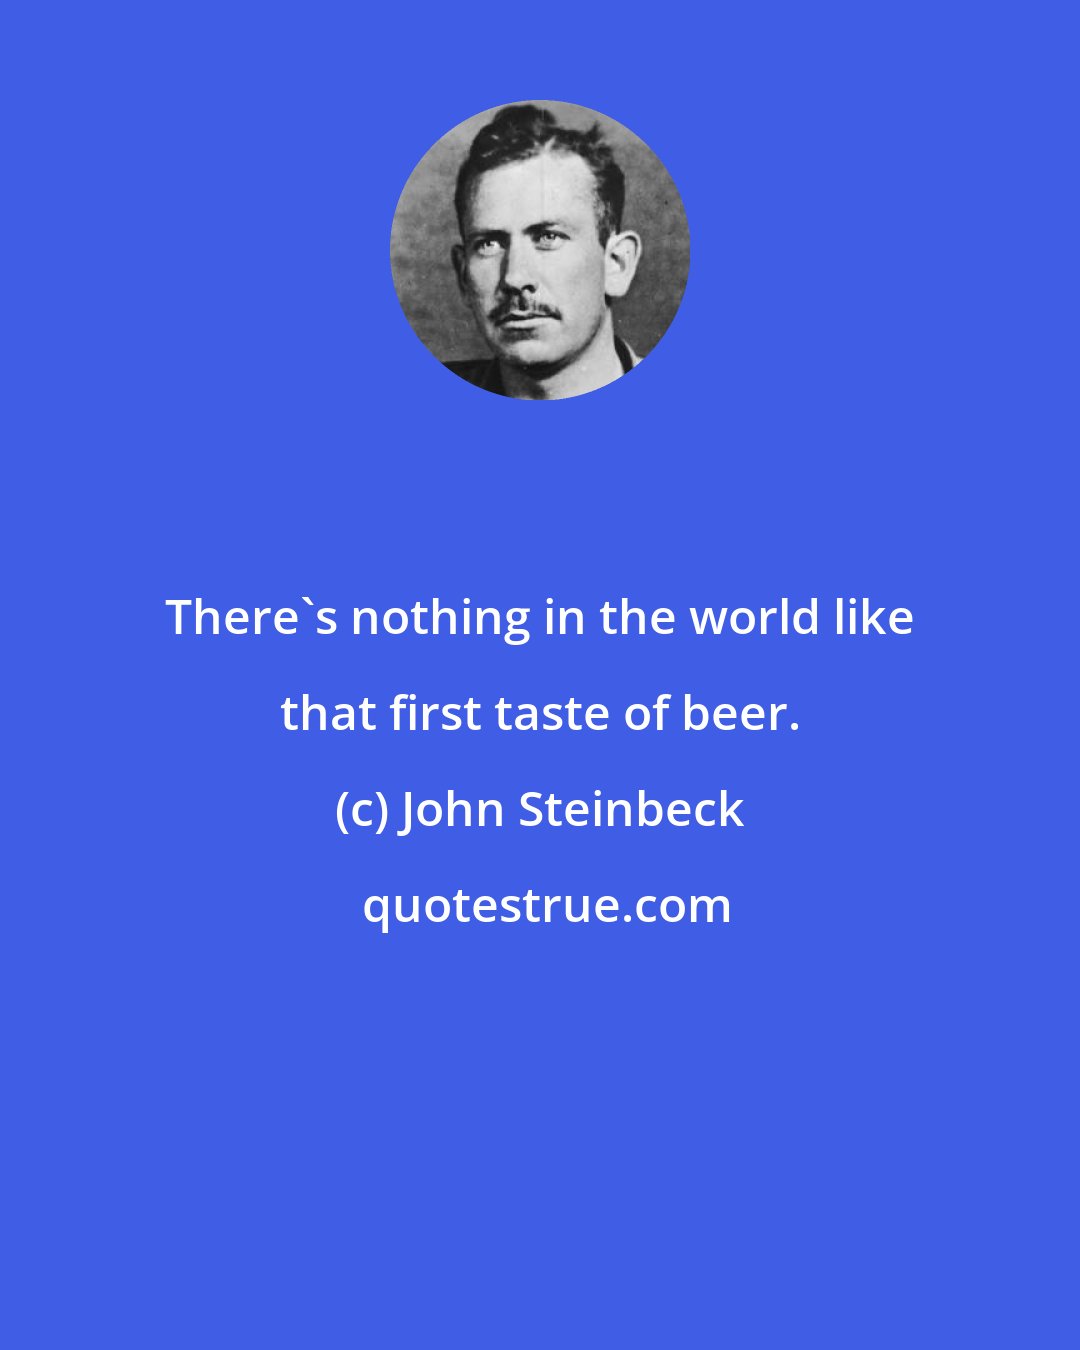 John Steinbeck: There's nothing in the world like that first taste of beer.